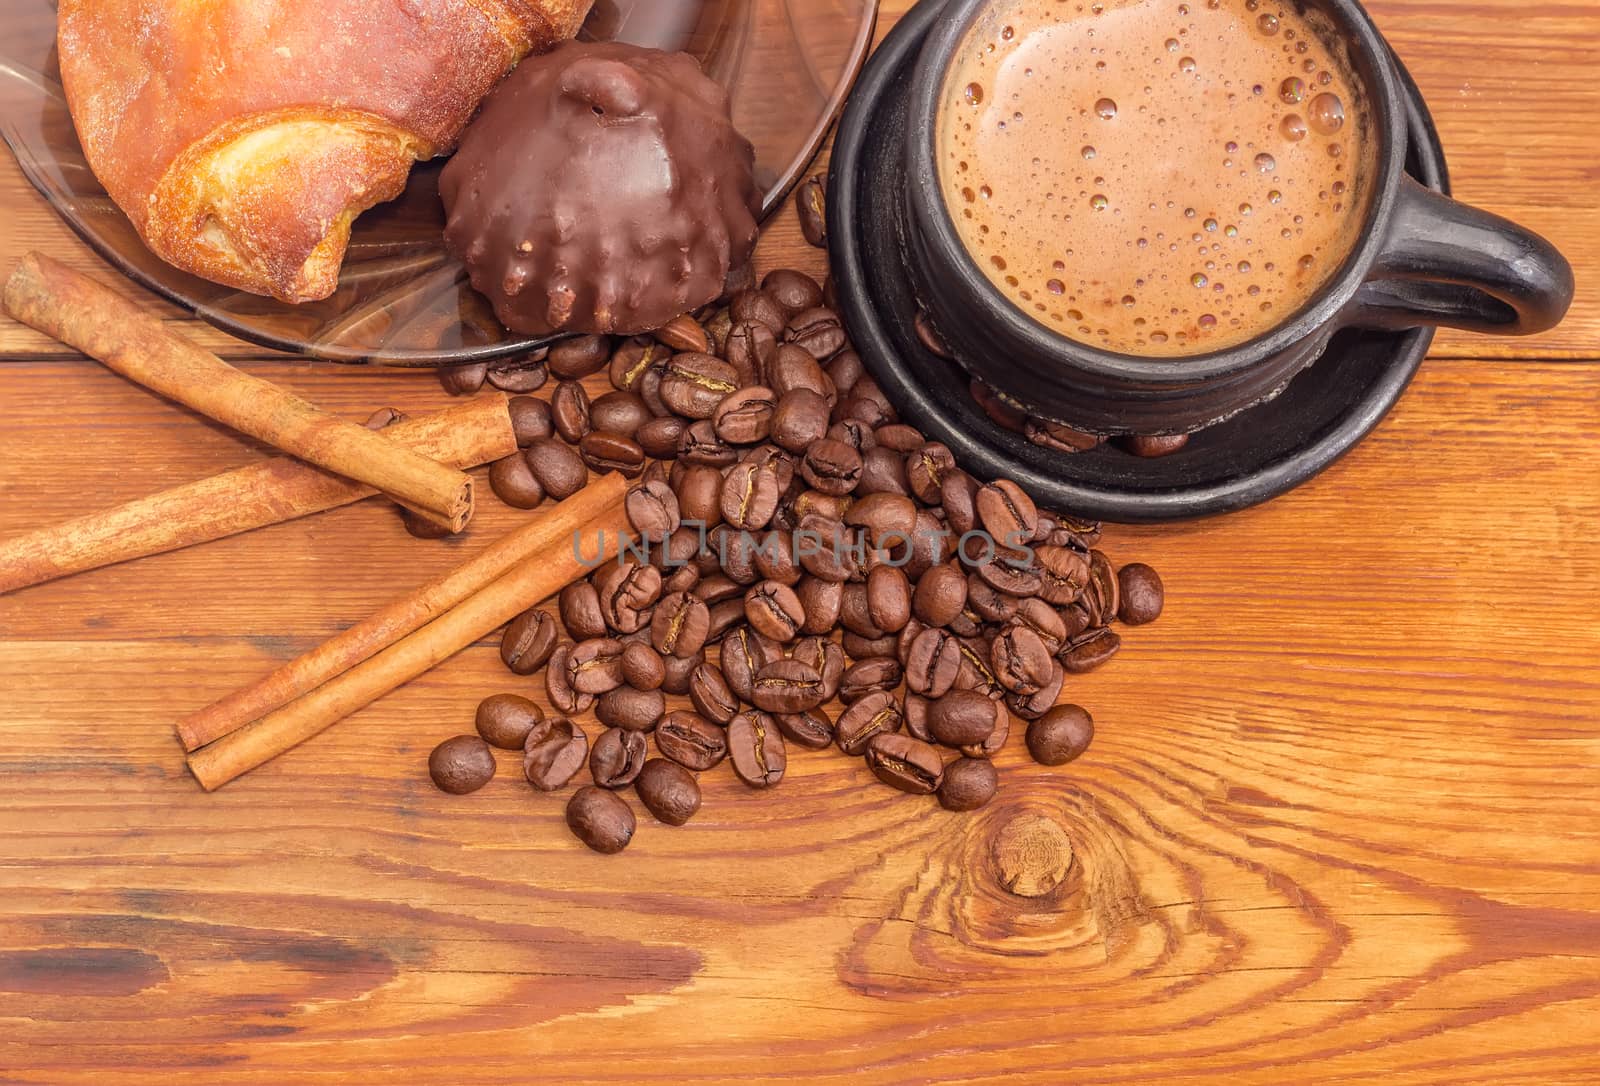 Fragment of black ceramic cup with freshly brewed coffee closeup on the background of roasted coffee beans, cinnamon sticks, chocolate truffle and croissant on a wooden surface
